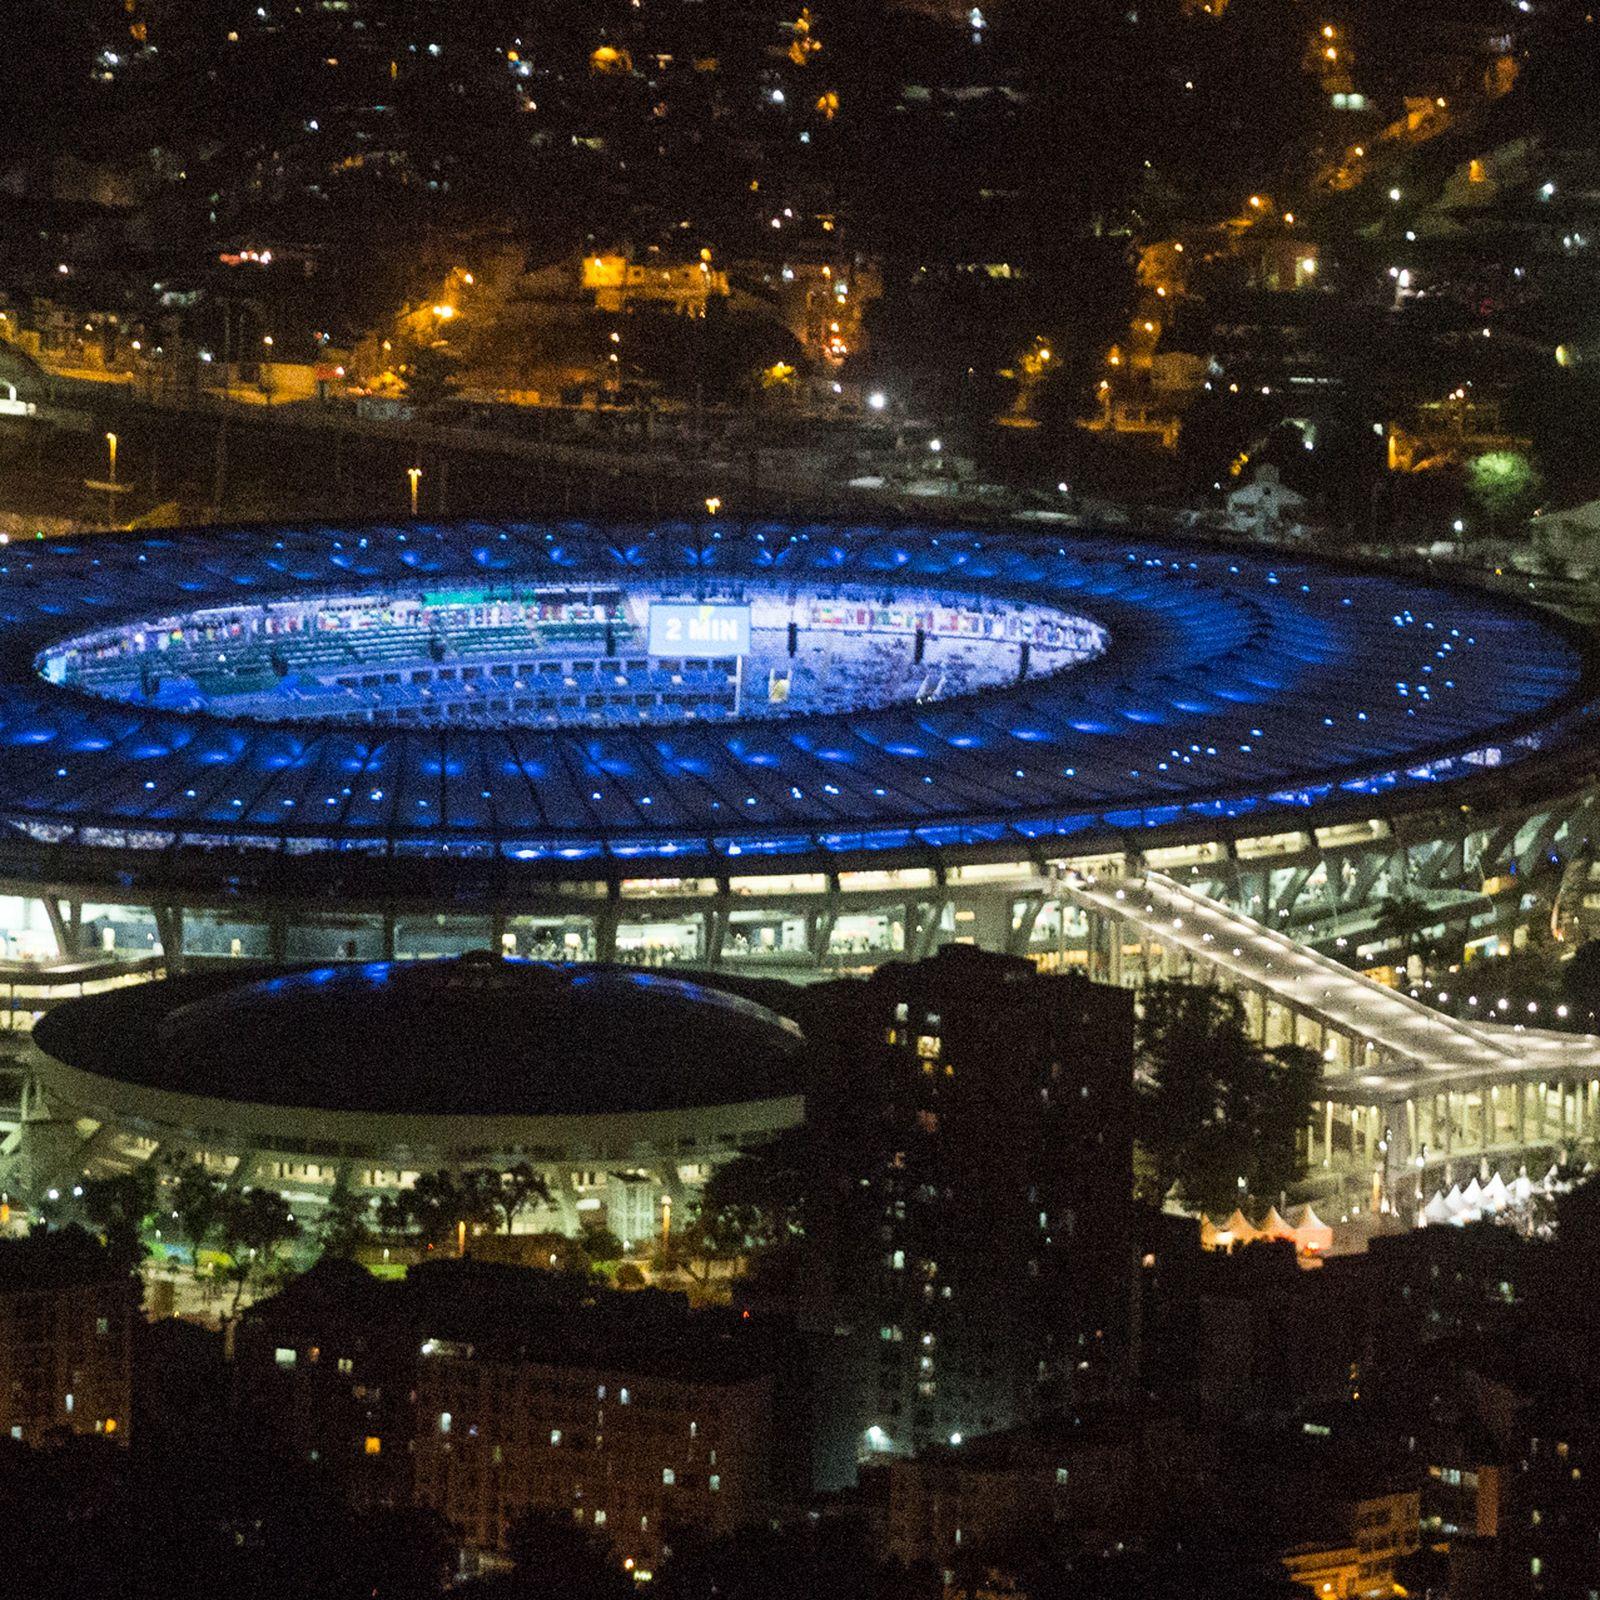 Facts About the Maracanã Stadium, Site of the Rio Olympics Opening